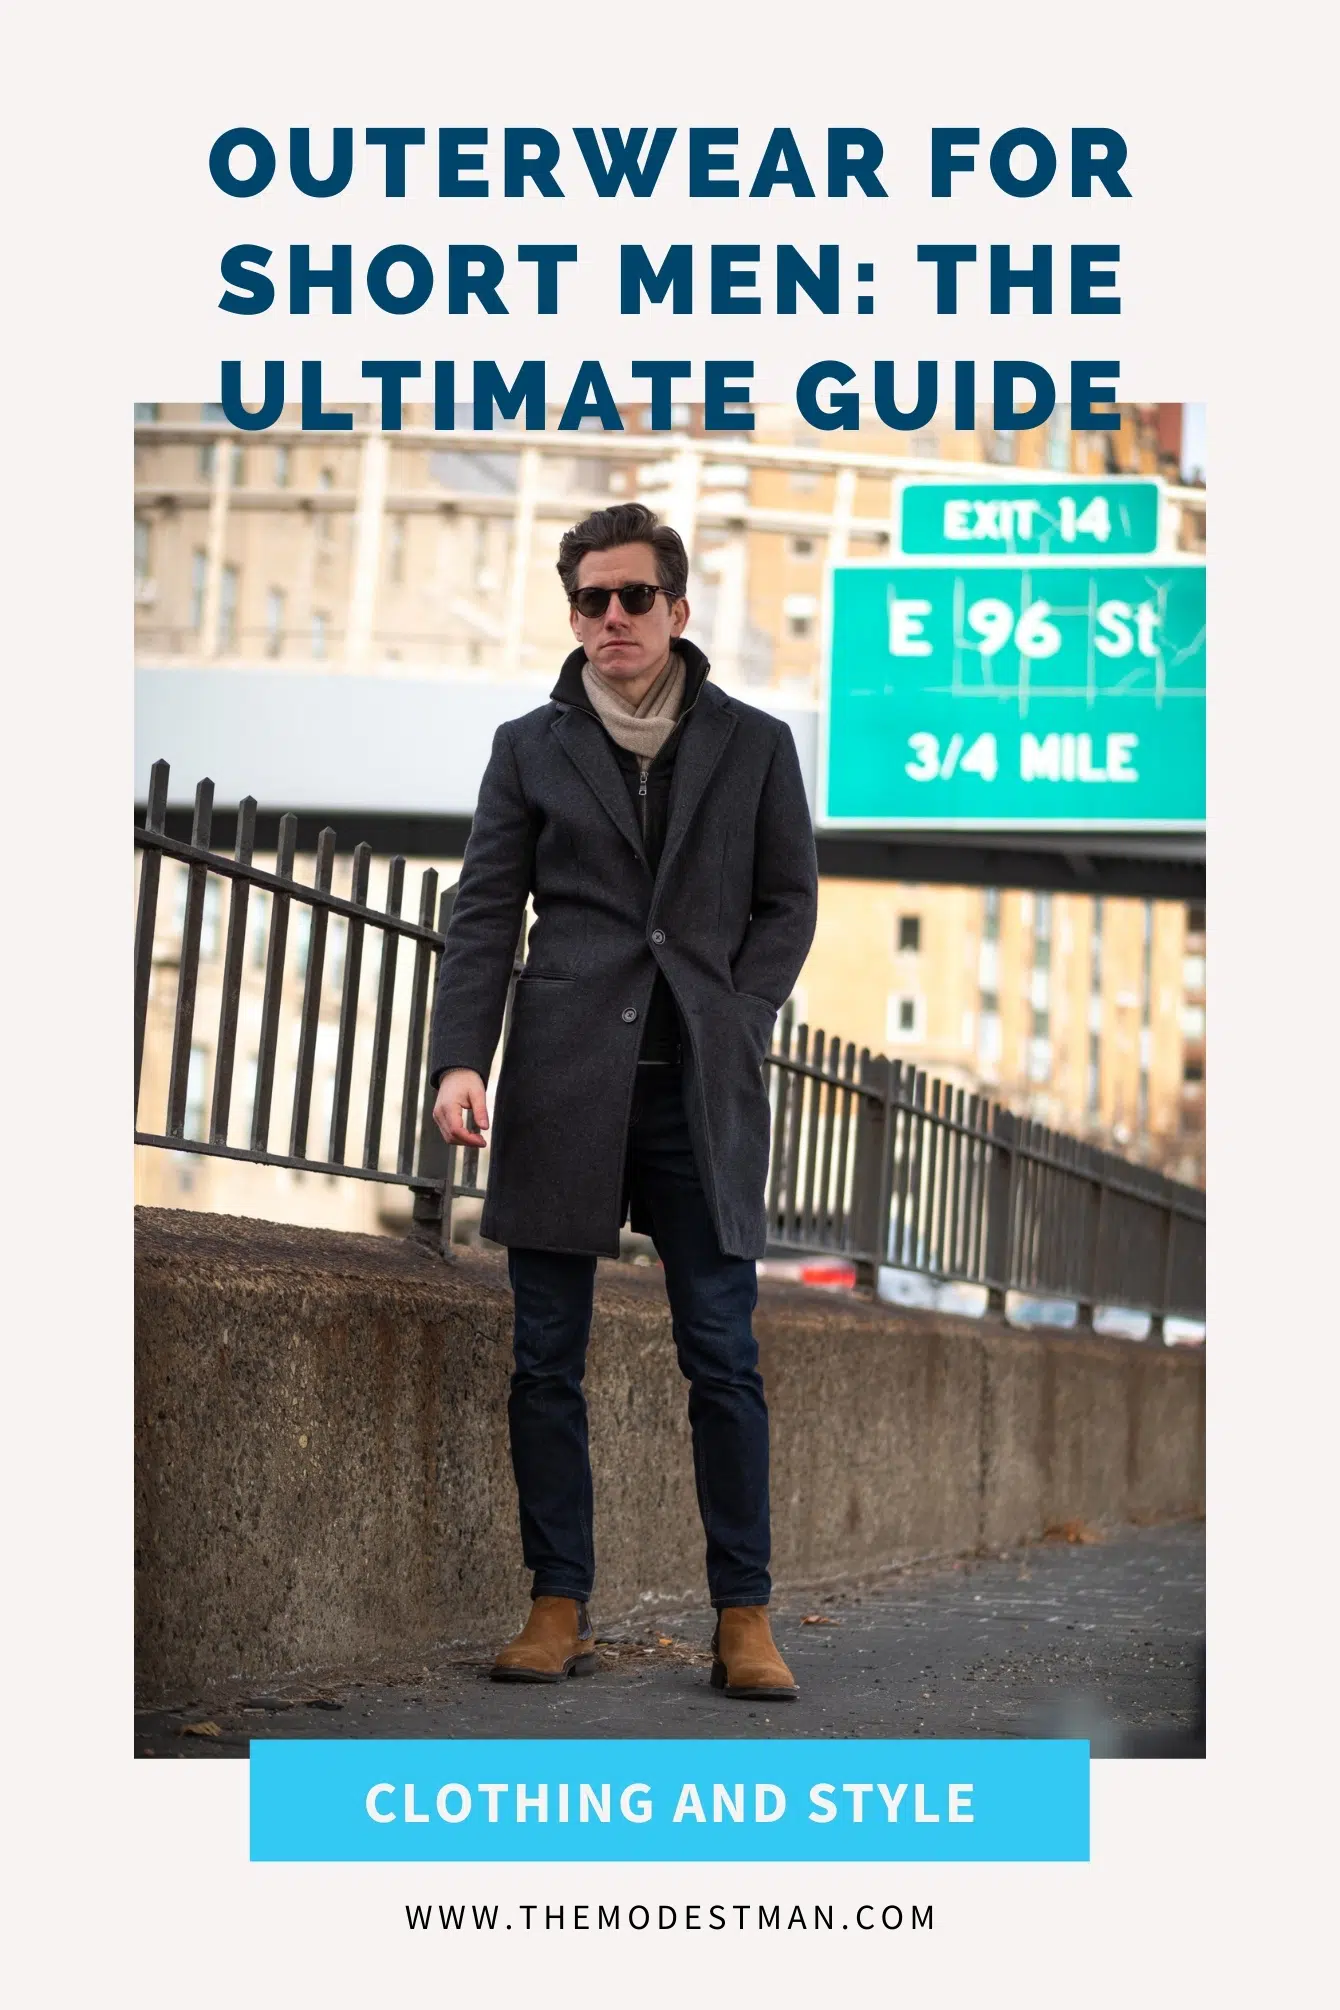 Outerwear for Short Men - the ultimate guide